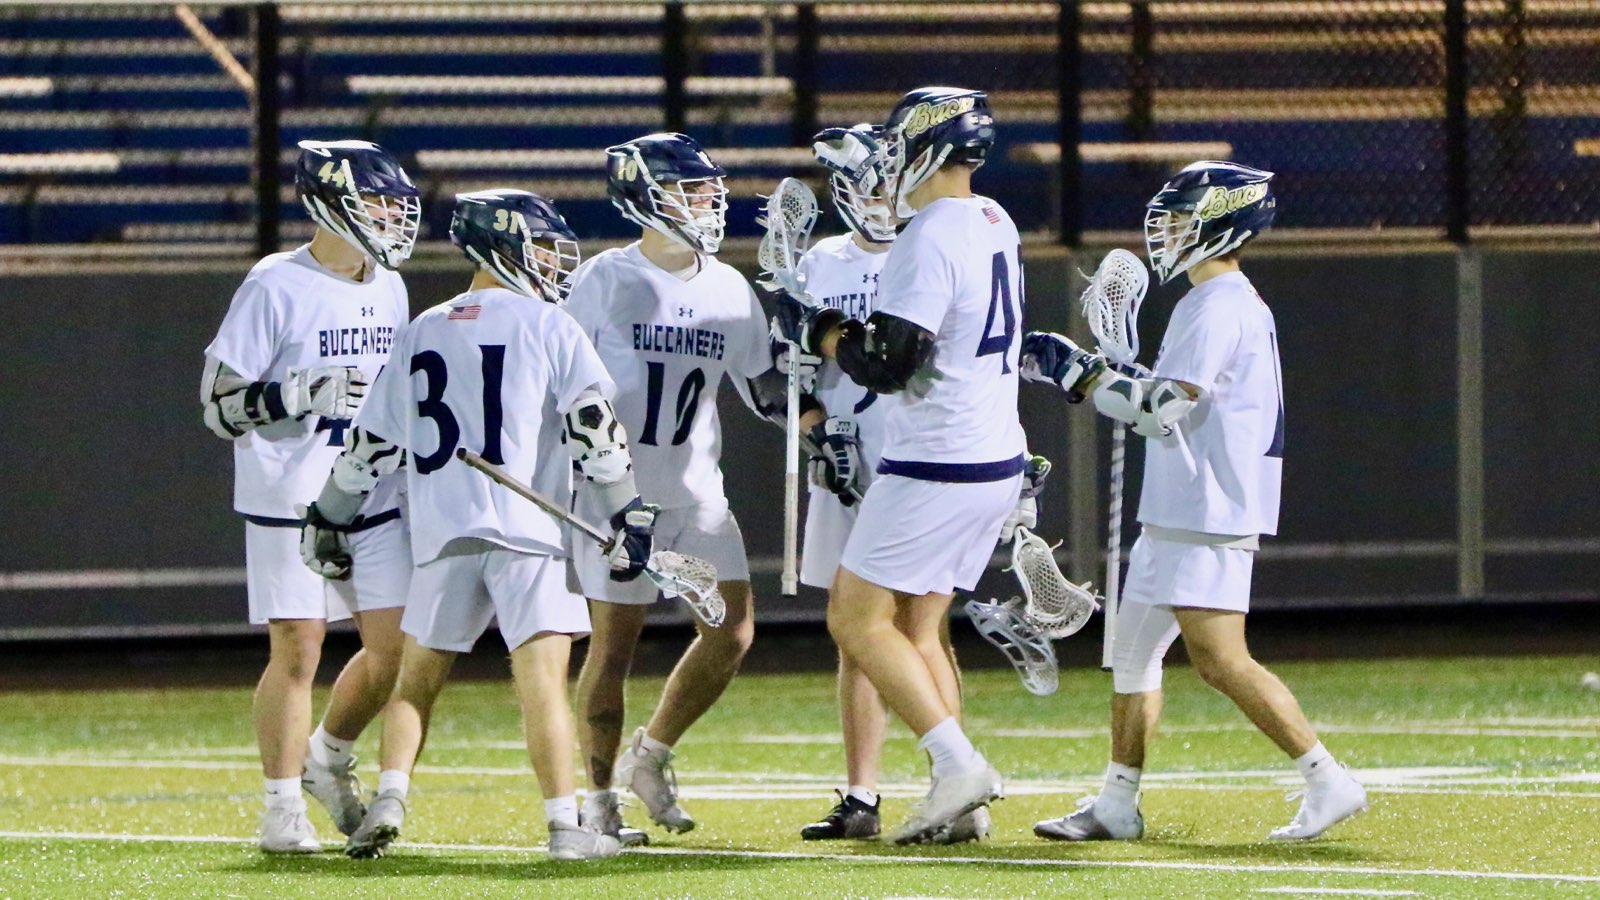 Men's Lacrosse Win's First Ever Playoff Game in Win over ECSU